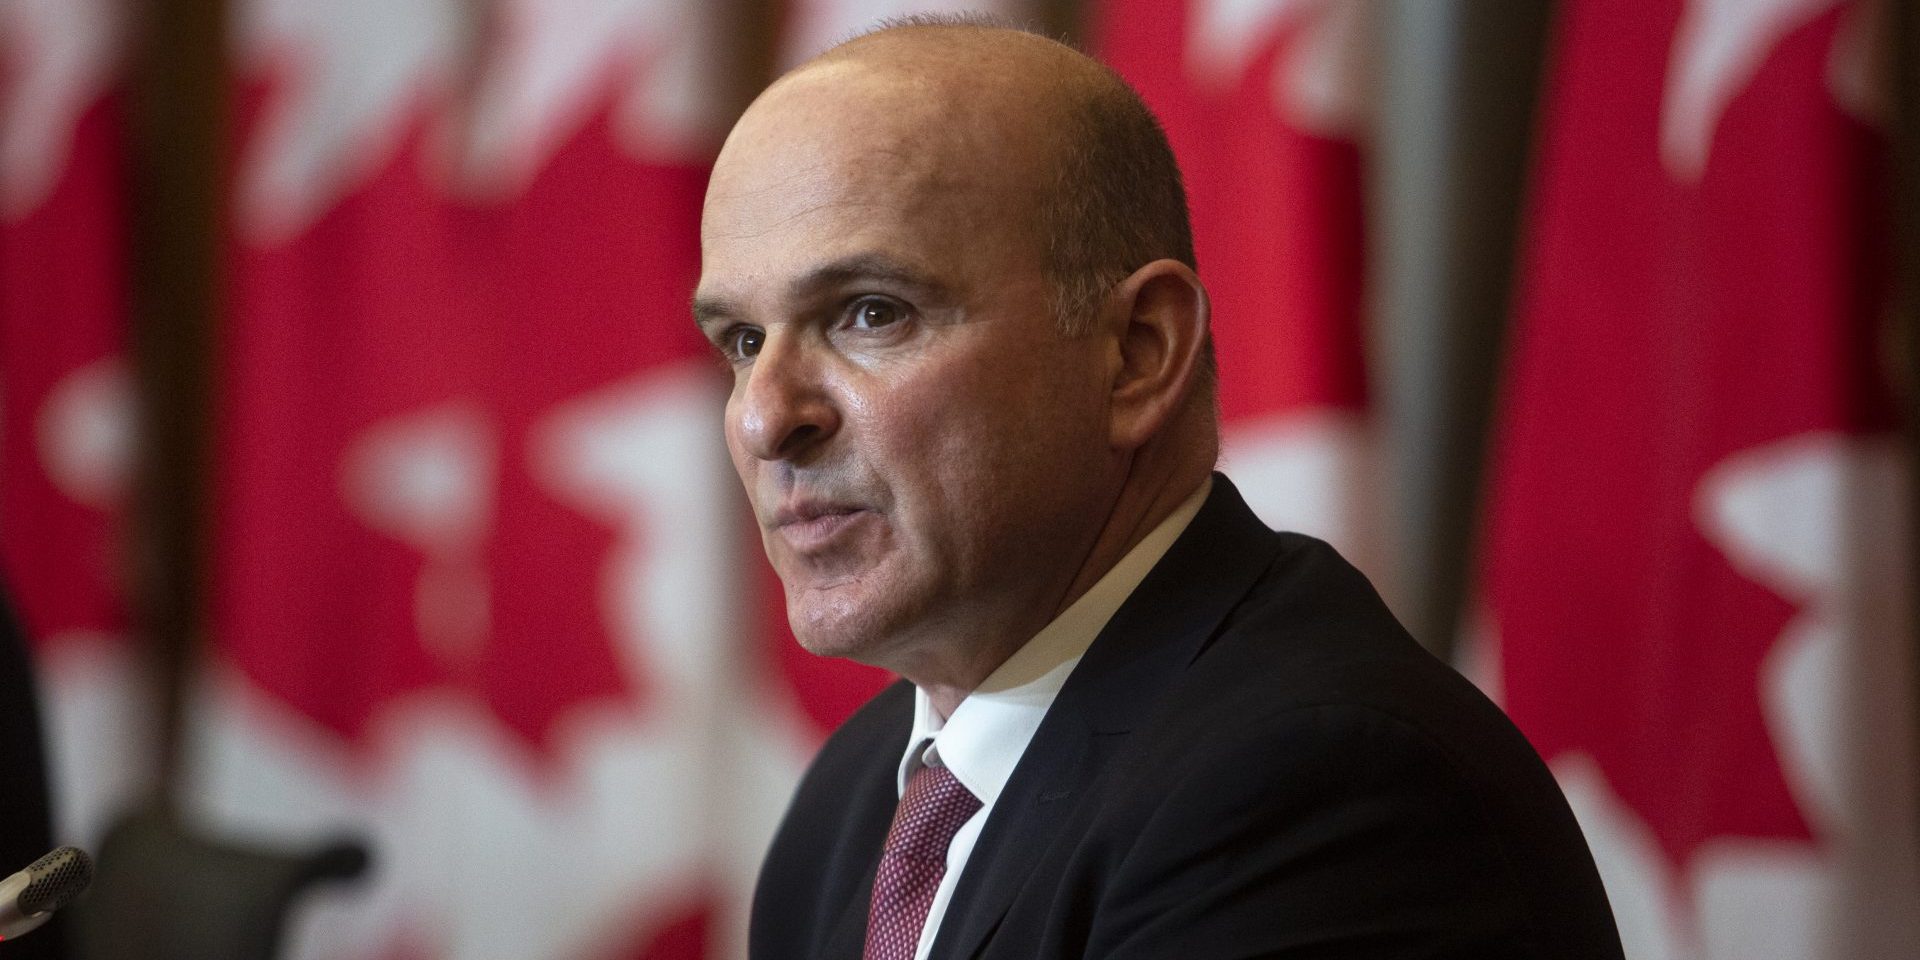 Employment Minister Randy Boissonnault. The Hill Times photograph by Andrew Meade